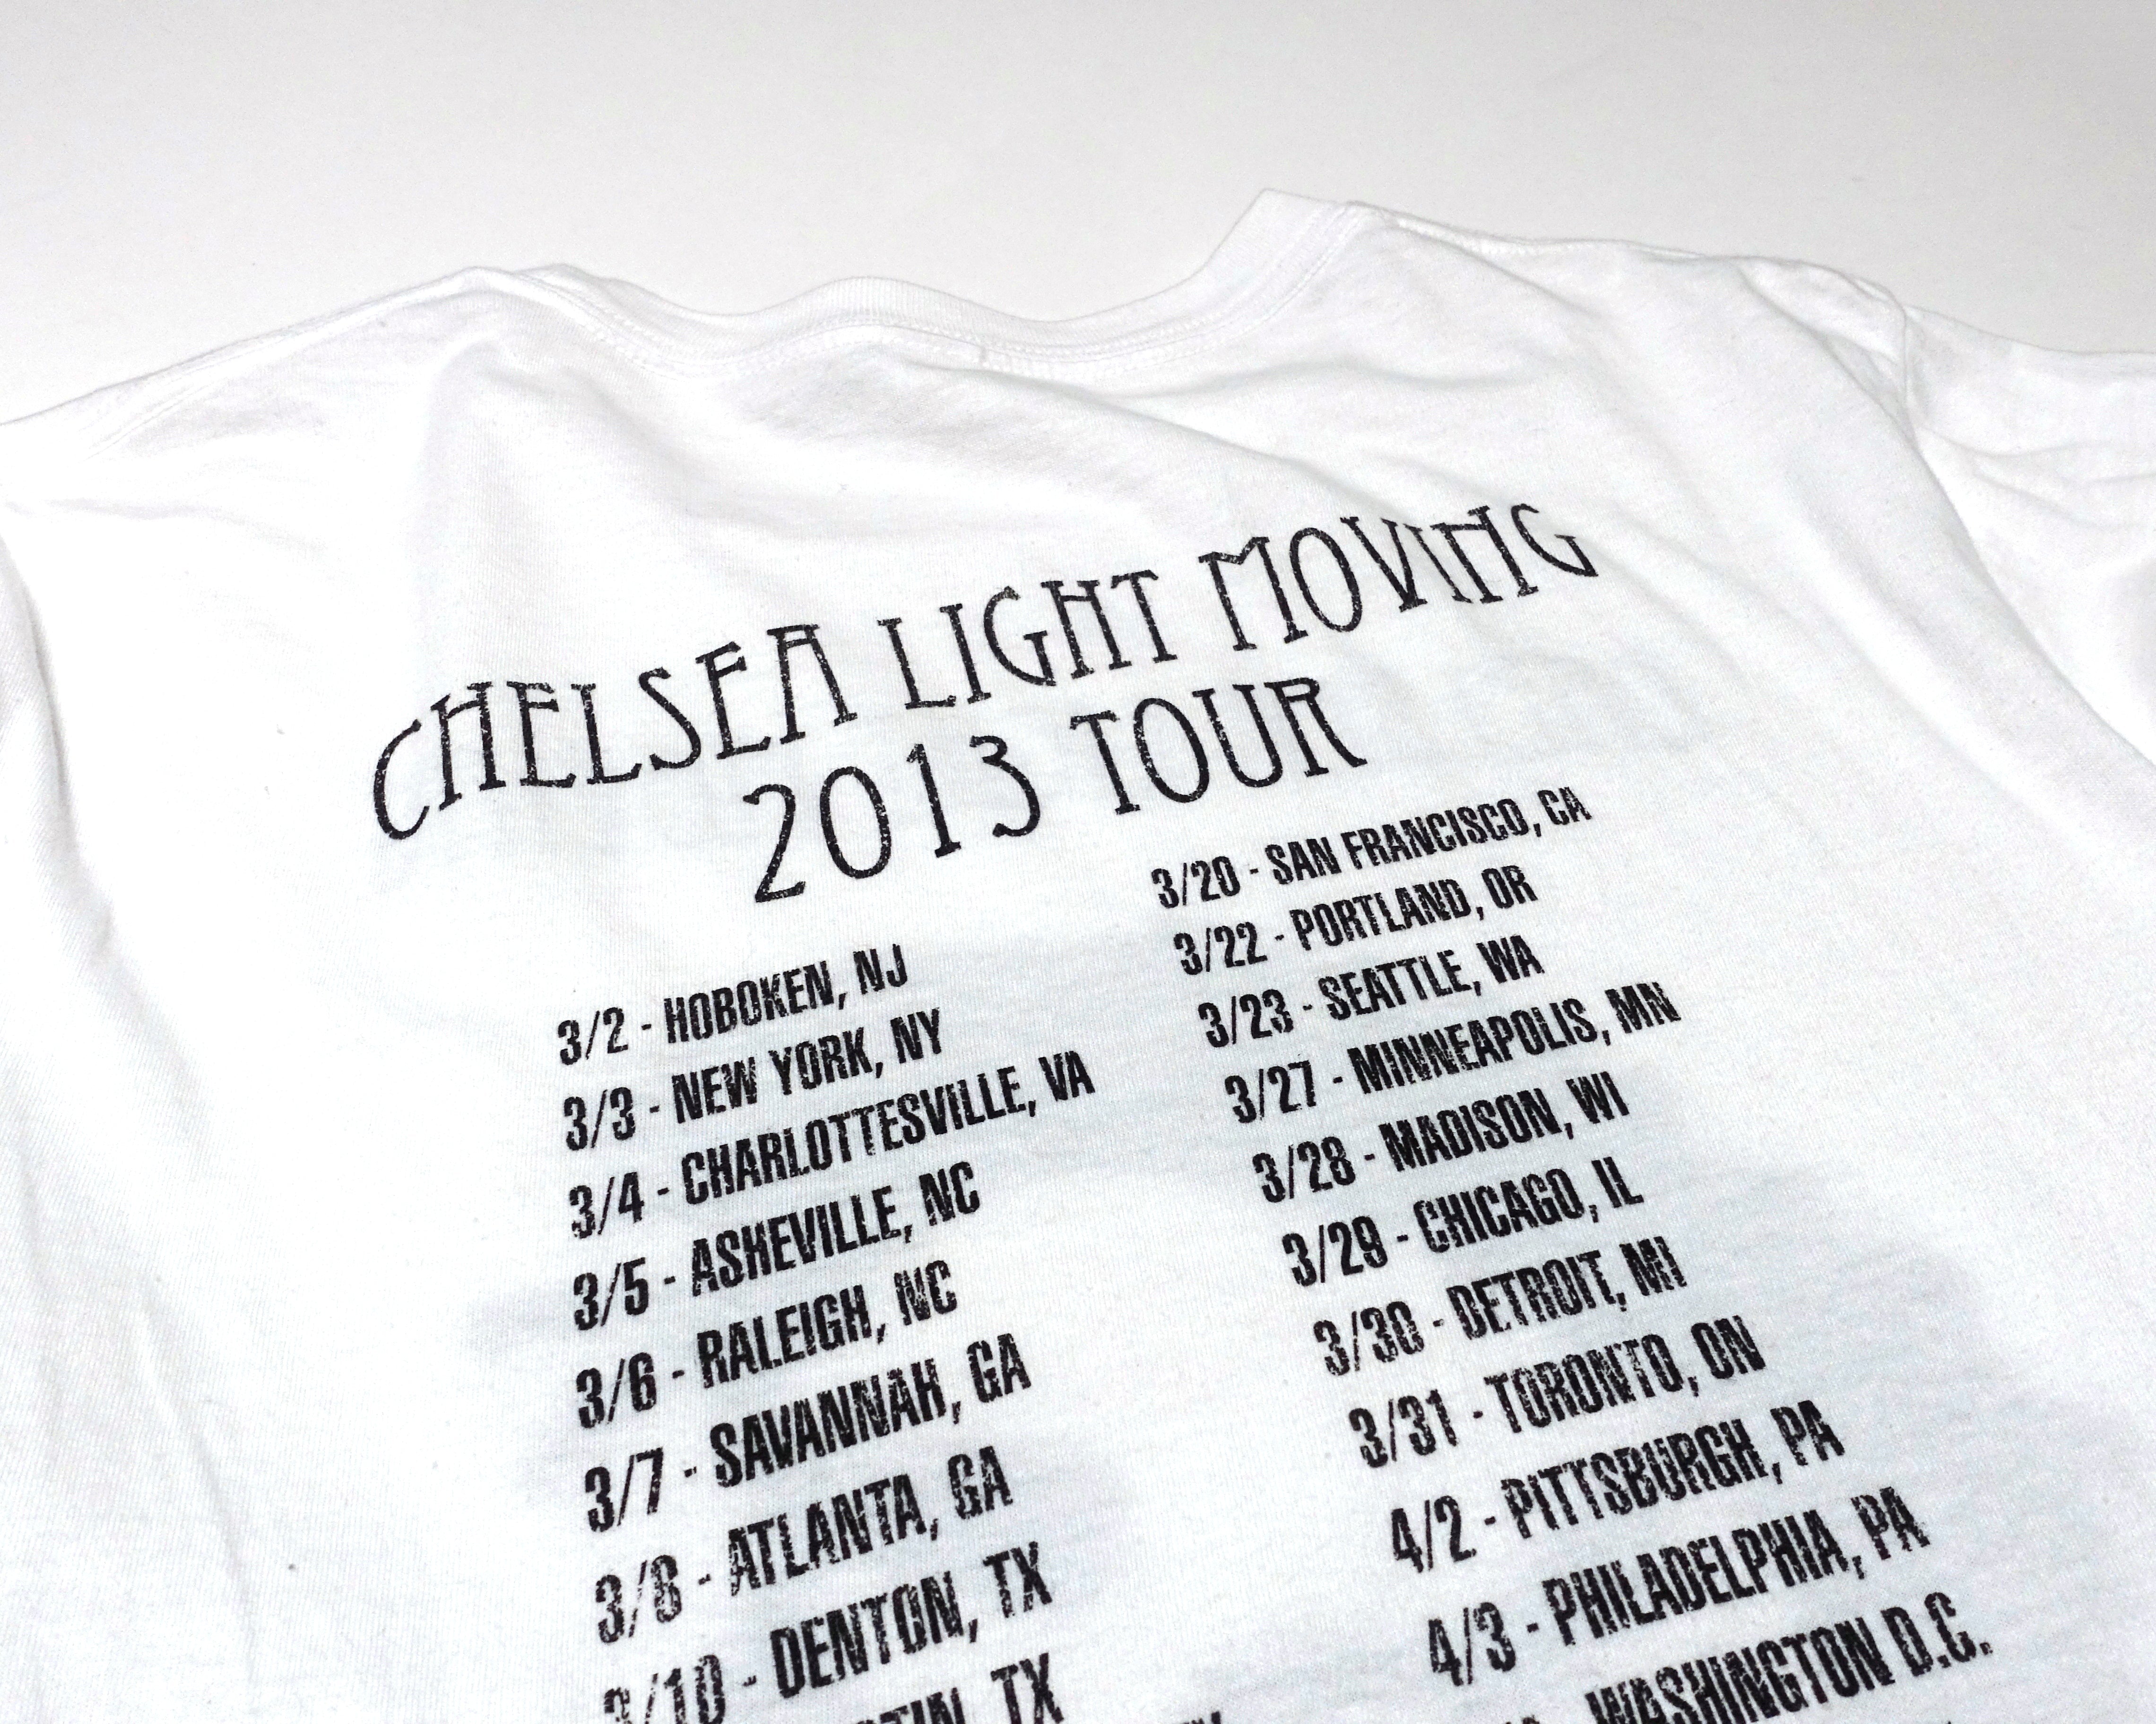 Chelsea Light Moving - 2013 Tour Shirt (Thurston Moore Solo Project) Size Large